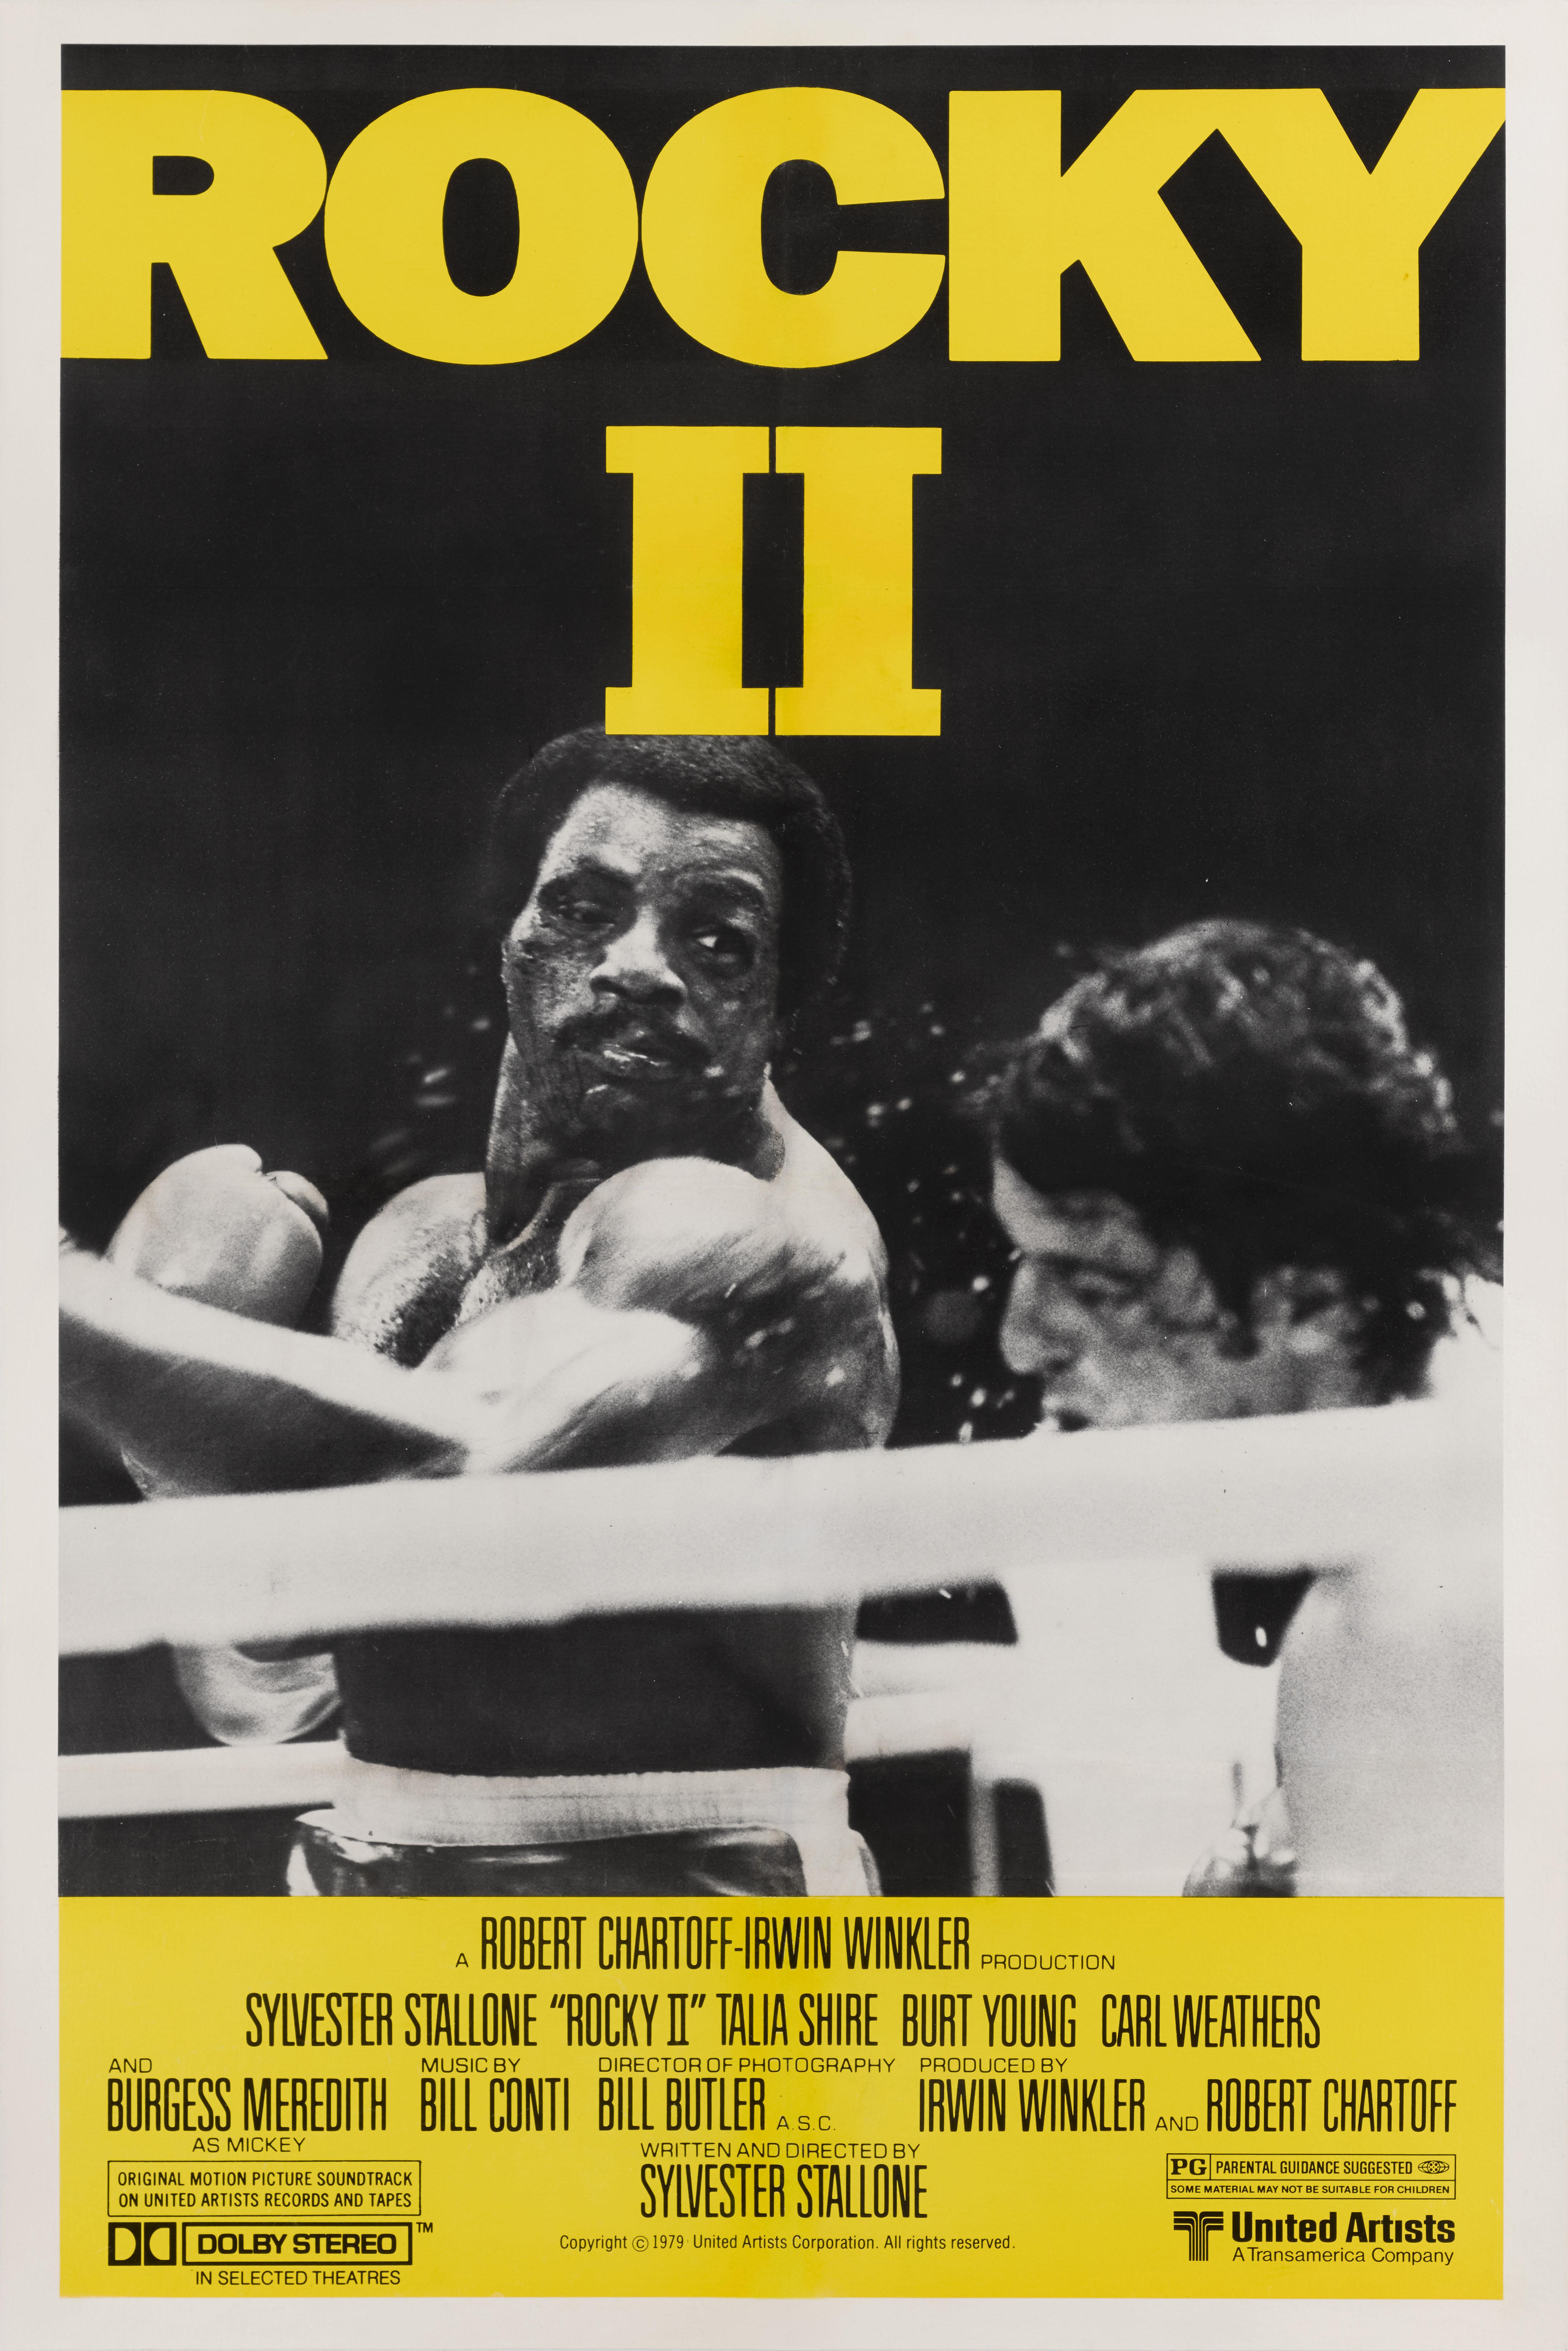 Original US film poster for the sequel of Rocky. This is the style B poster.
The film starred Sylvestor Stallone, Talia Shire, Burgess Meredith, Carl Weathers, and  Mr.T.
This poster is conservation linen backed and it would be shipped rolled in a